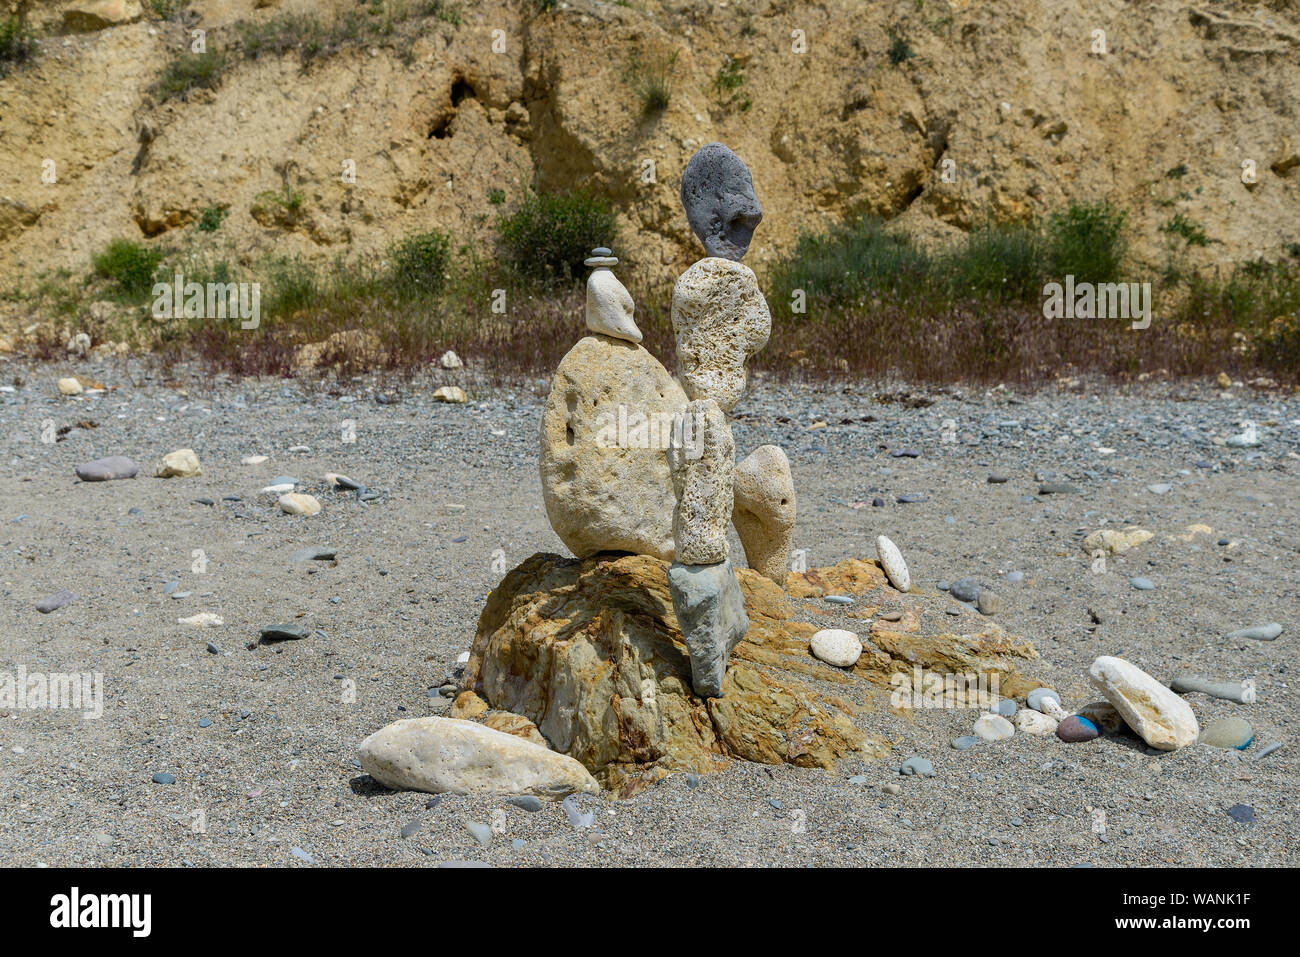 A stone sculpture stands on a deserted beach Stock Photo